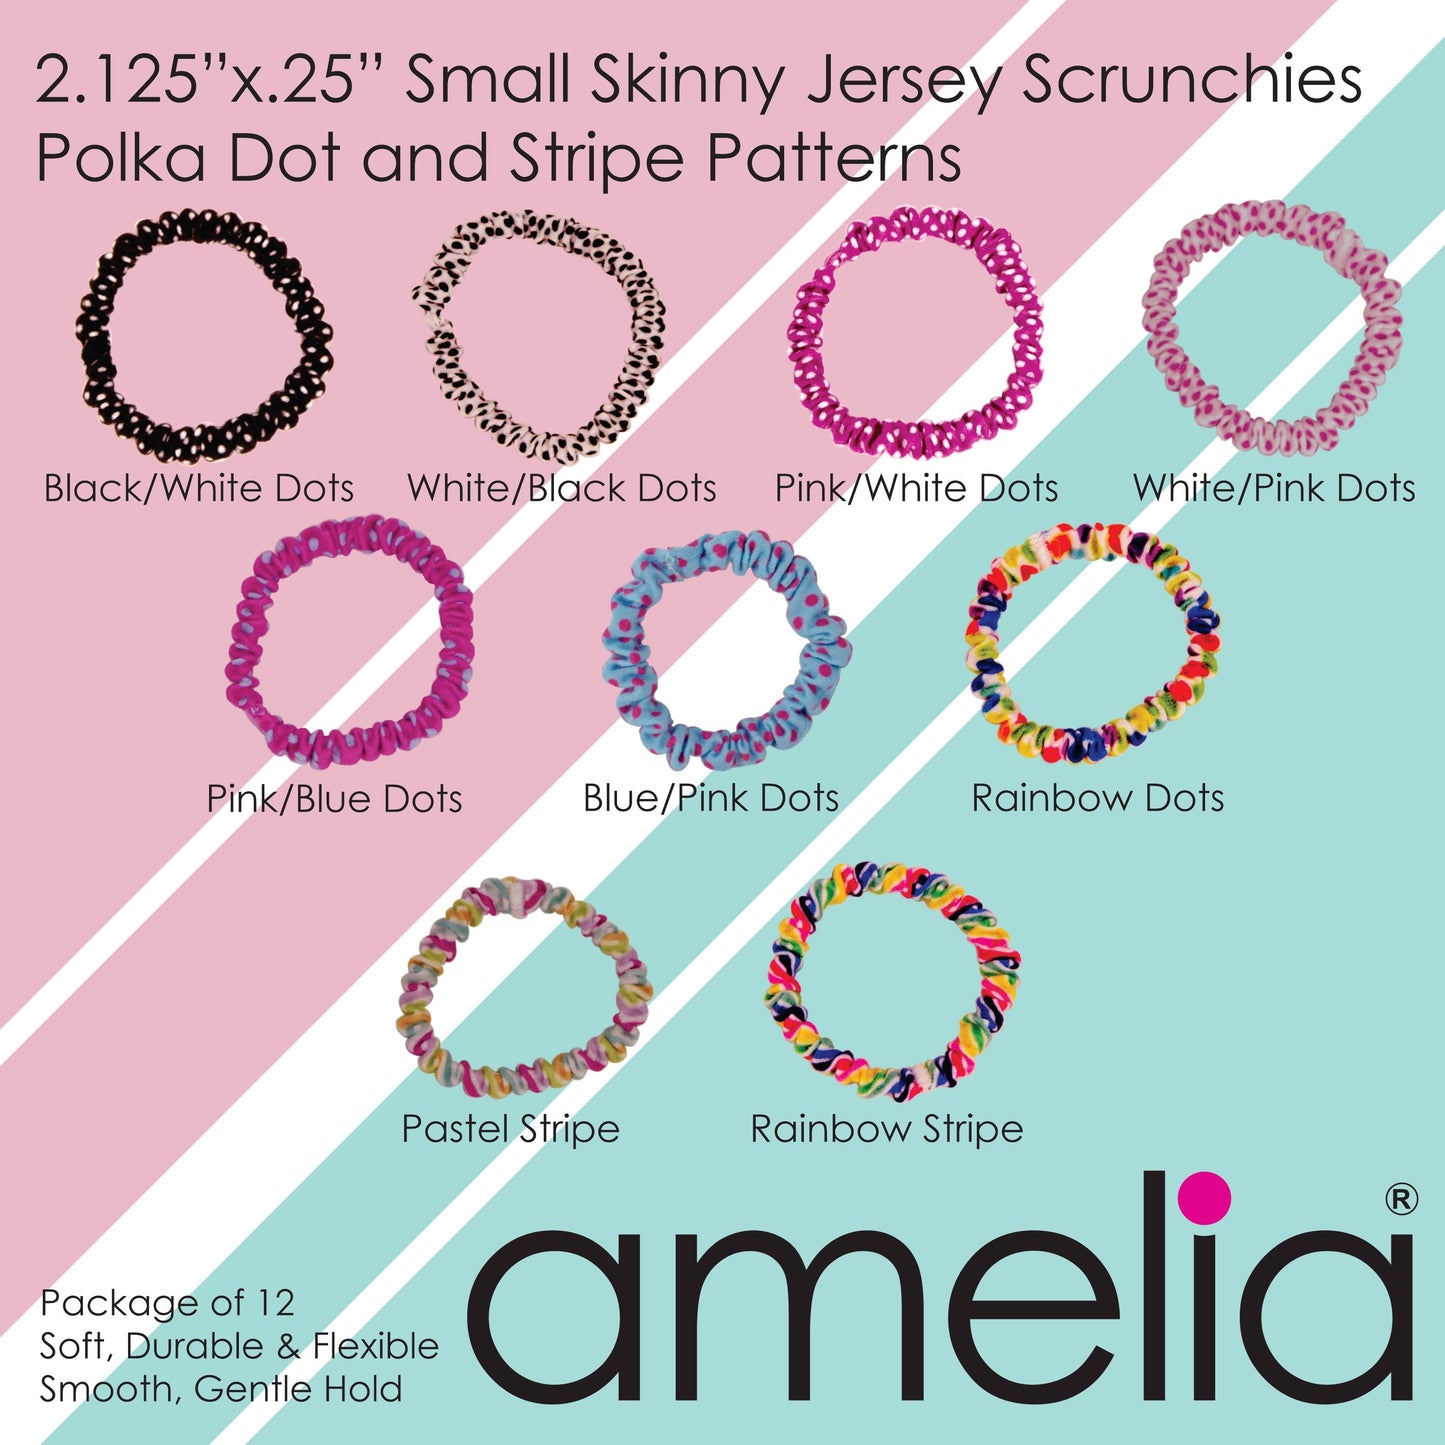 Amelia Beauty, Tan Skinny Jersey Scrunchies, 2.125in Diameter, Gentle on Hair, Strong Hold, No Snag, No Dents or Creases. 12 Pack - 12 Retail Packs